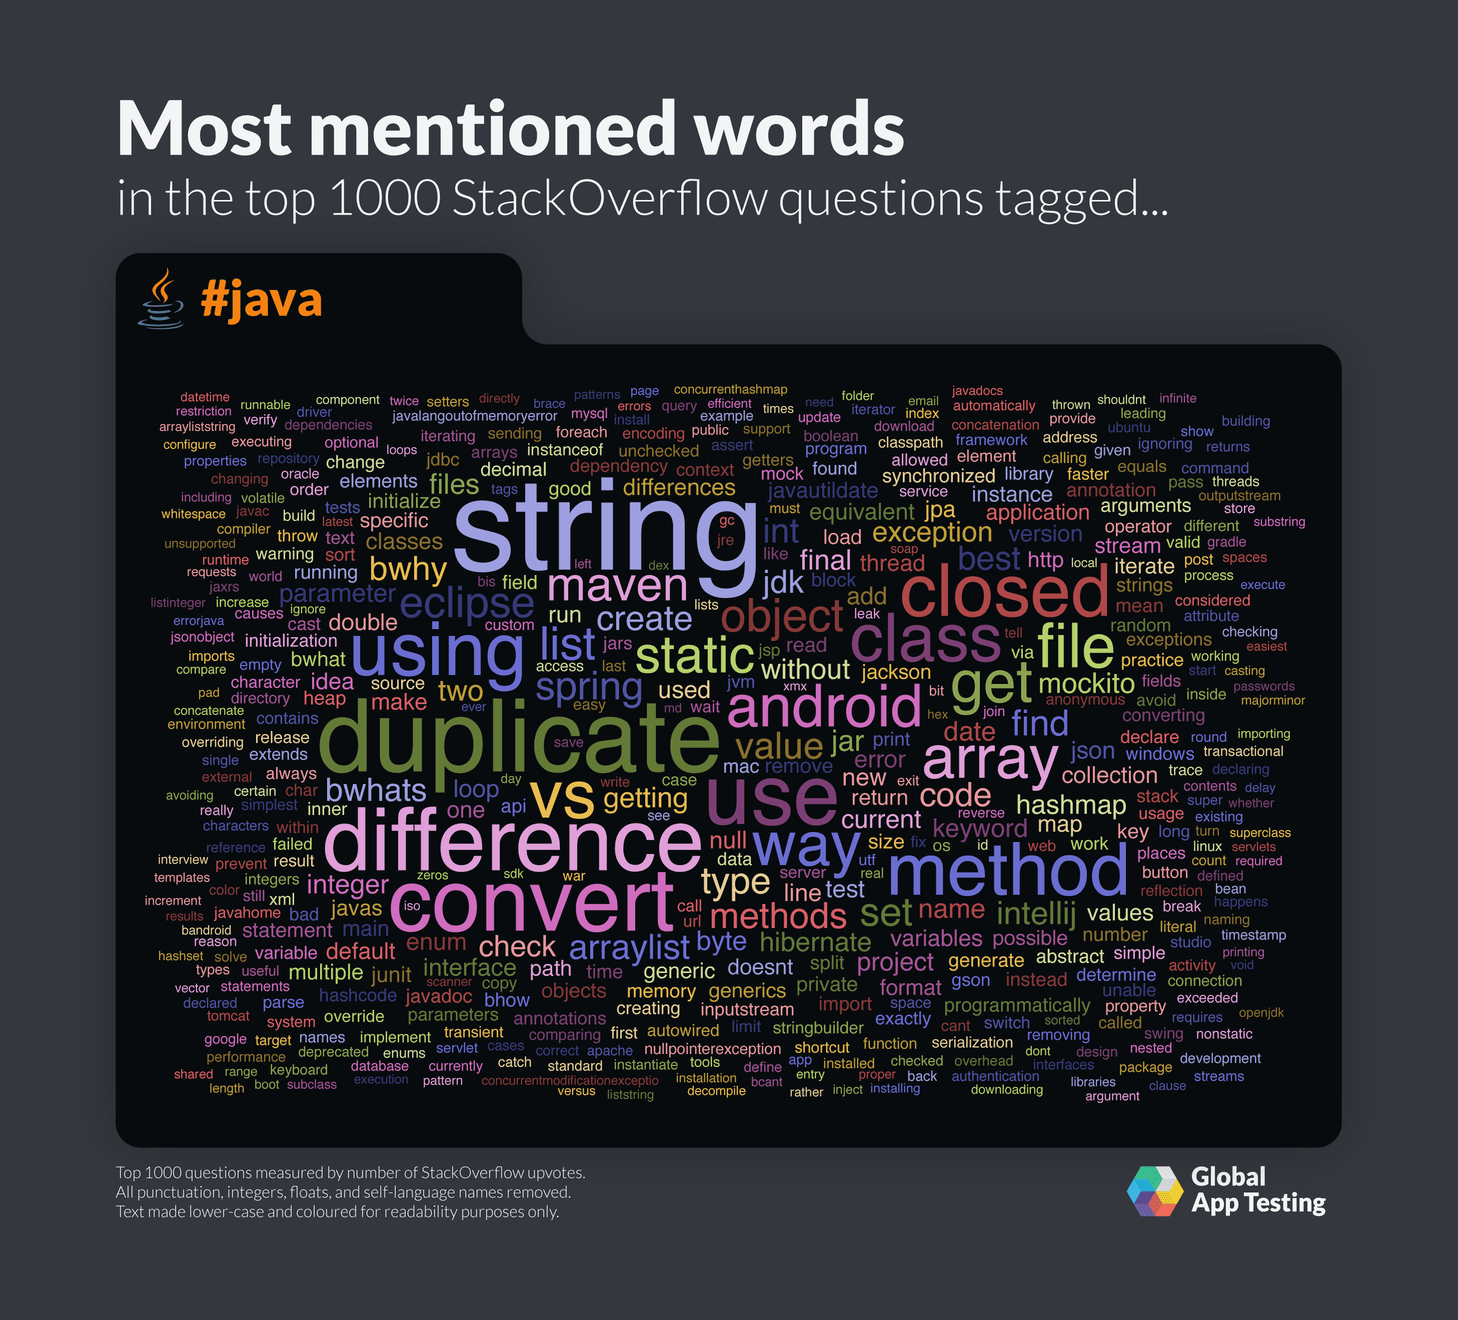 Most mentioned words for Java on StackOverflow.